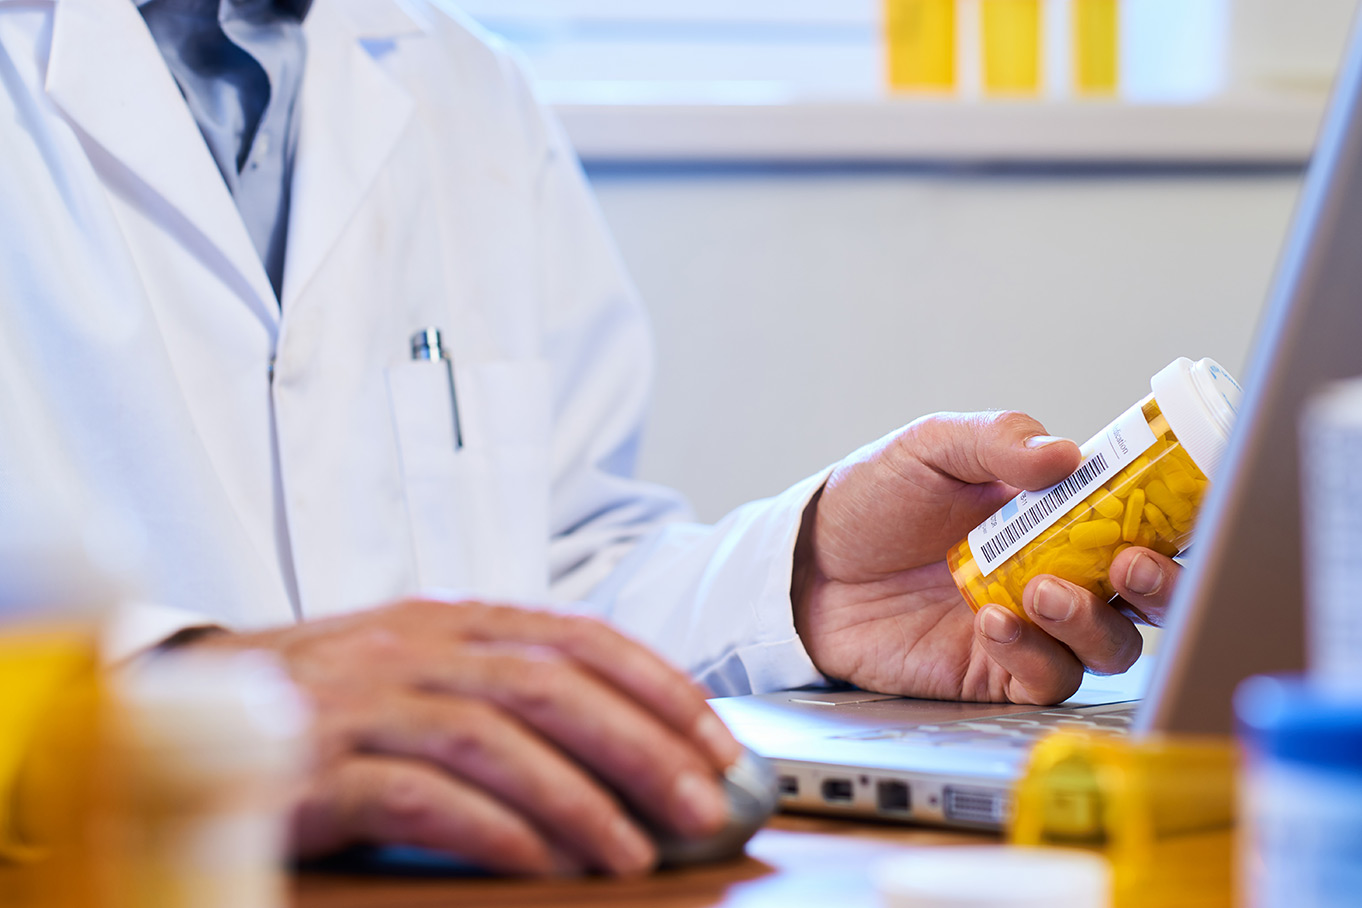 Image of a doctor inputting prescription